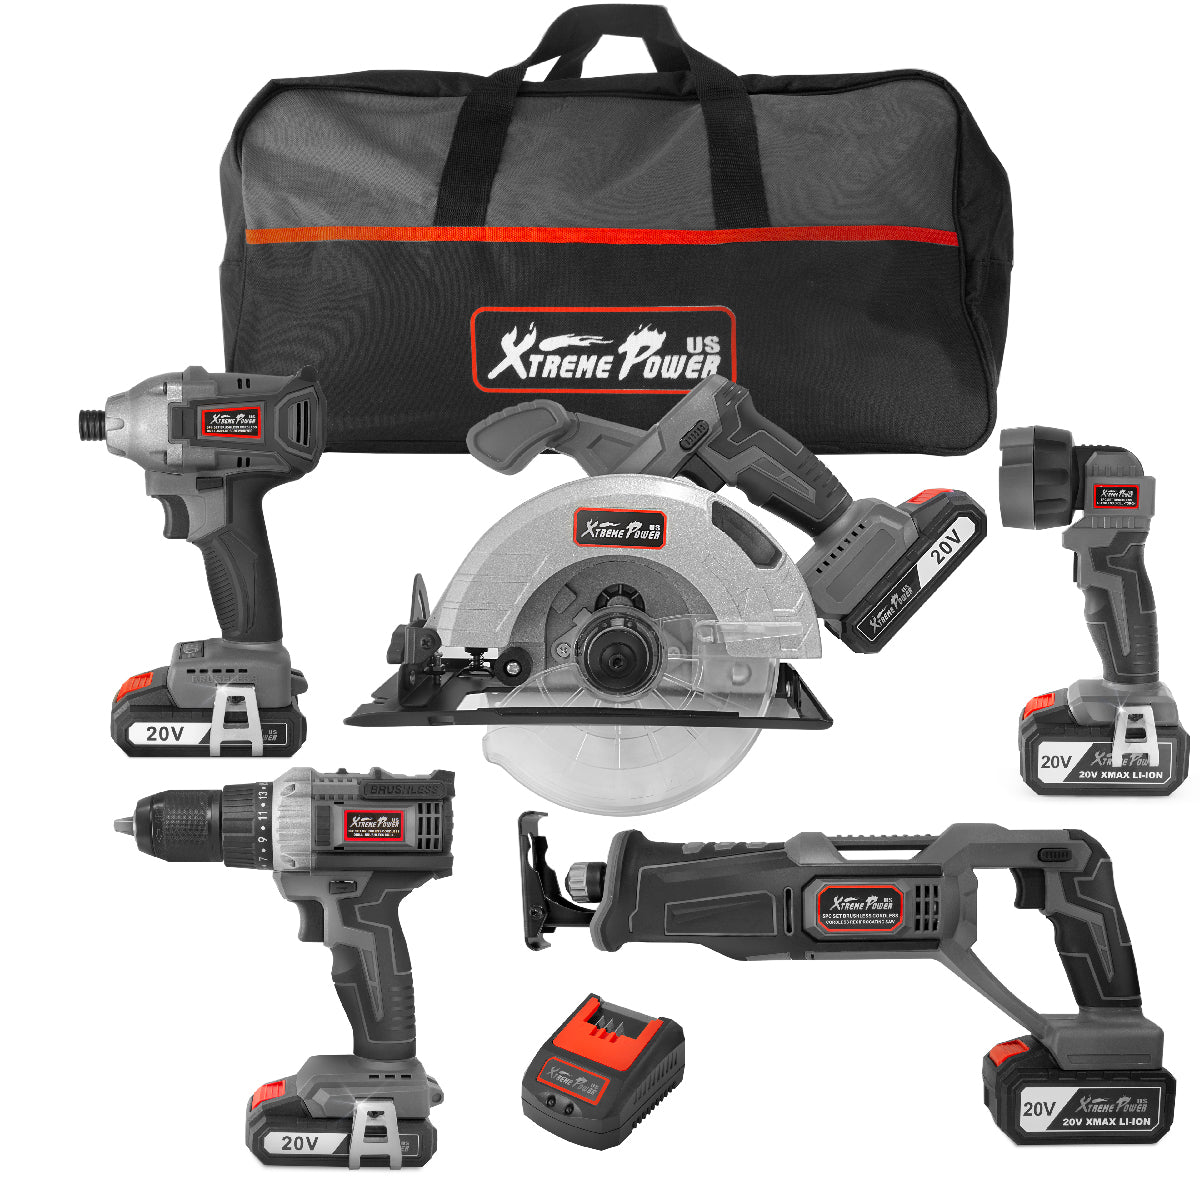 XtremepowerUS 20V Max Cordless Reciprocating Saw Battery-Powered 4.0Ah Cordless Saw Variable Speed with Tool Bag - 3